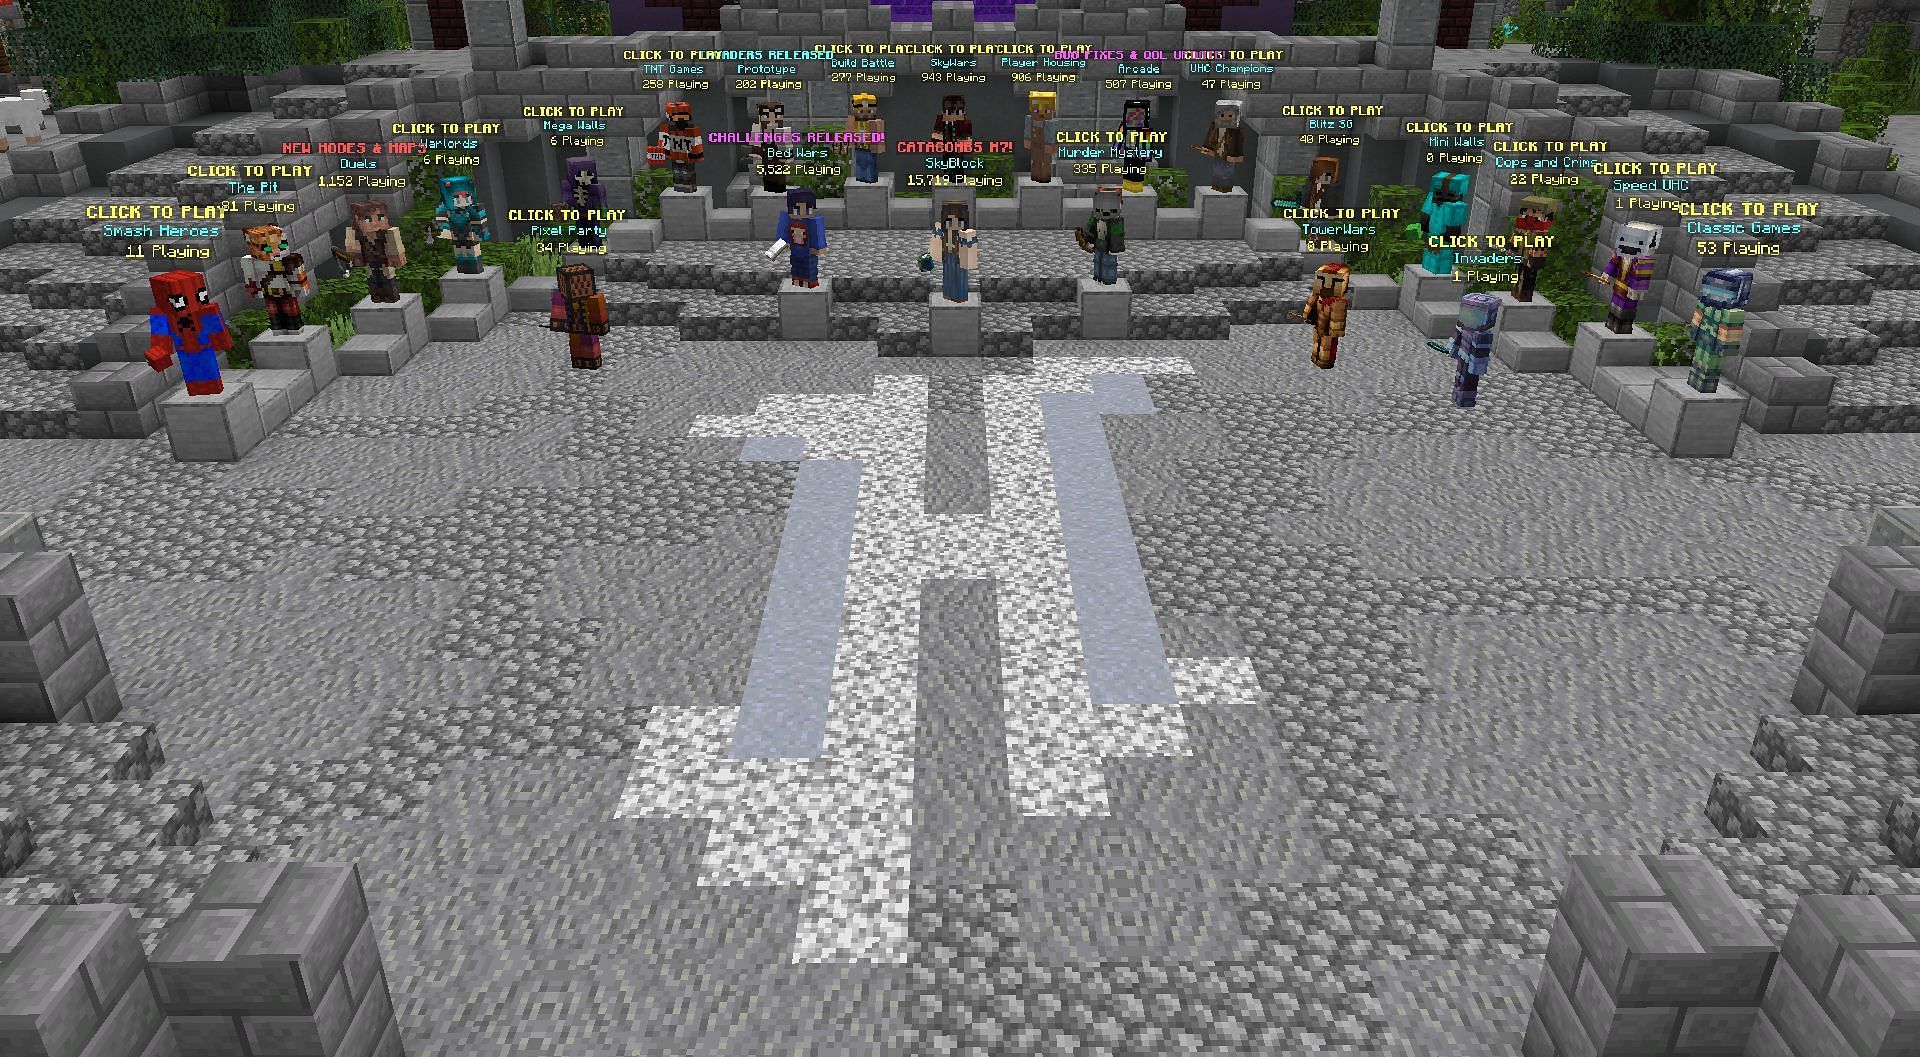 The server entrance and game selection area (Image via Minecraft)